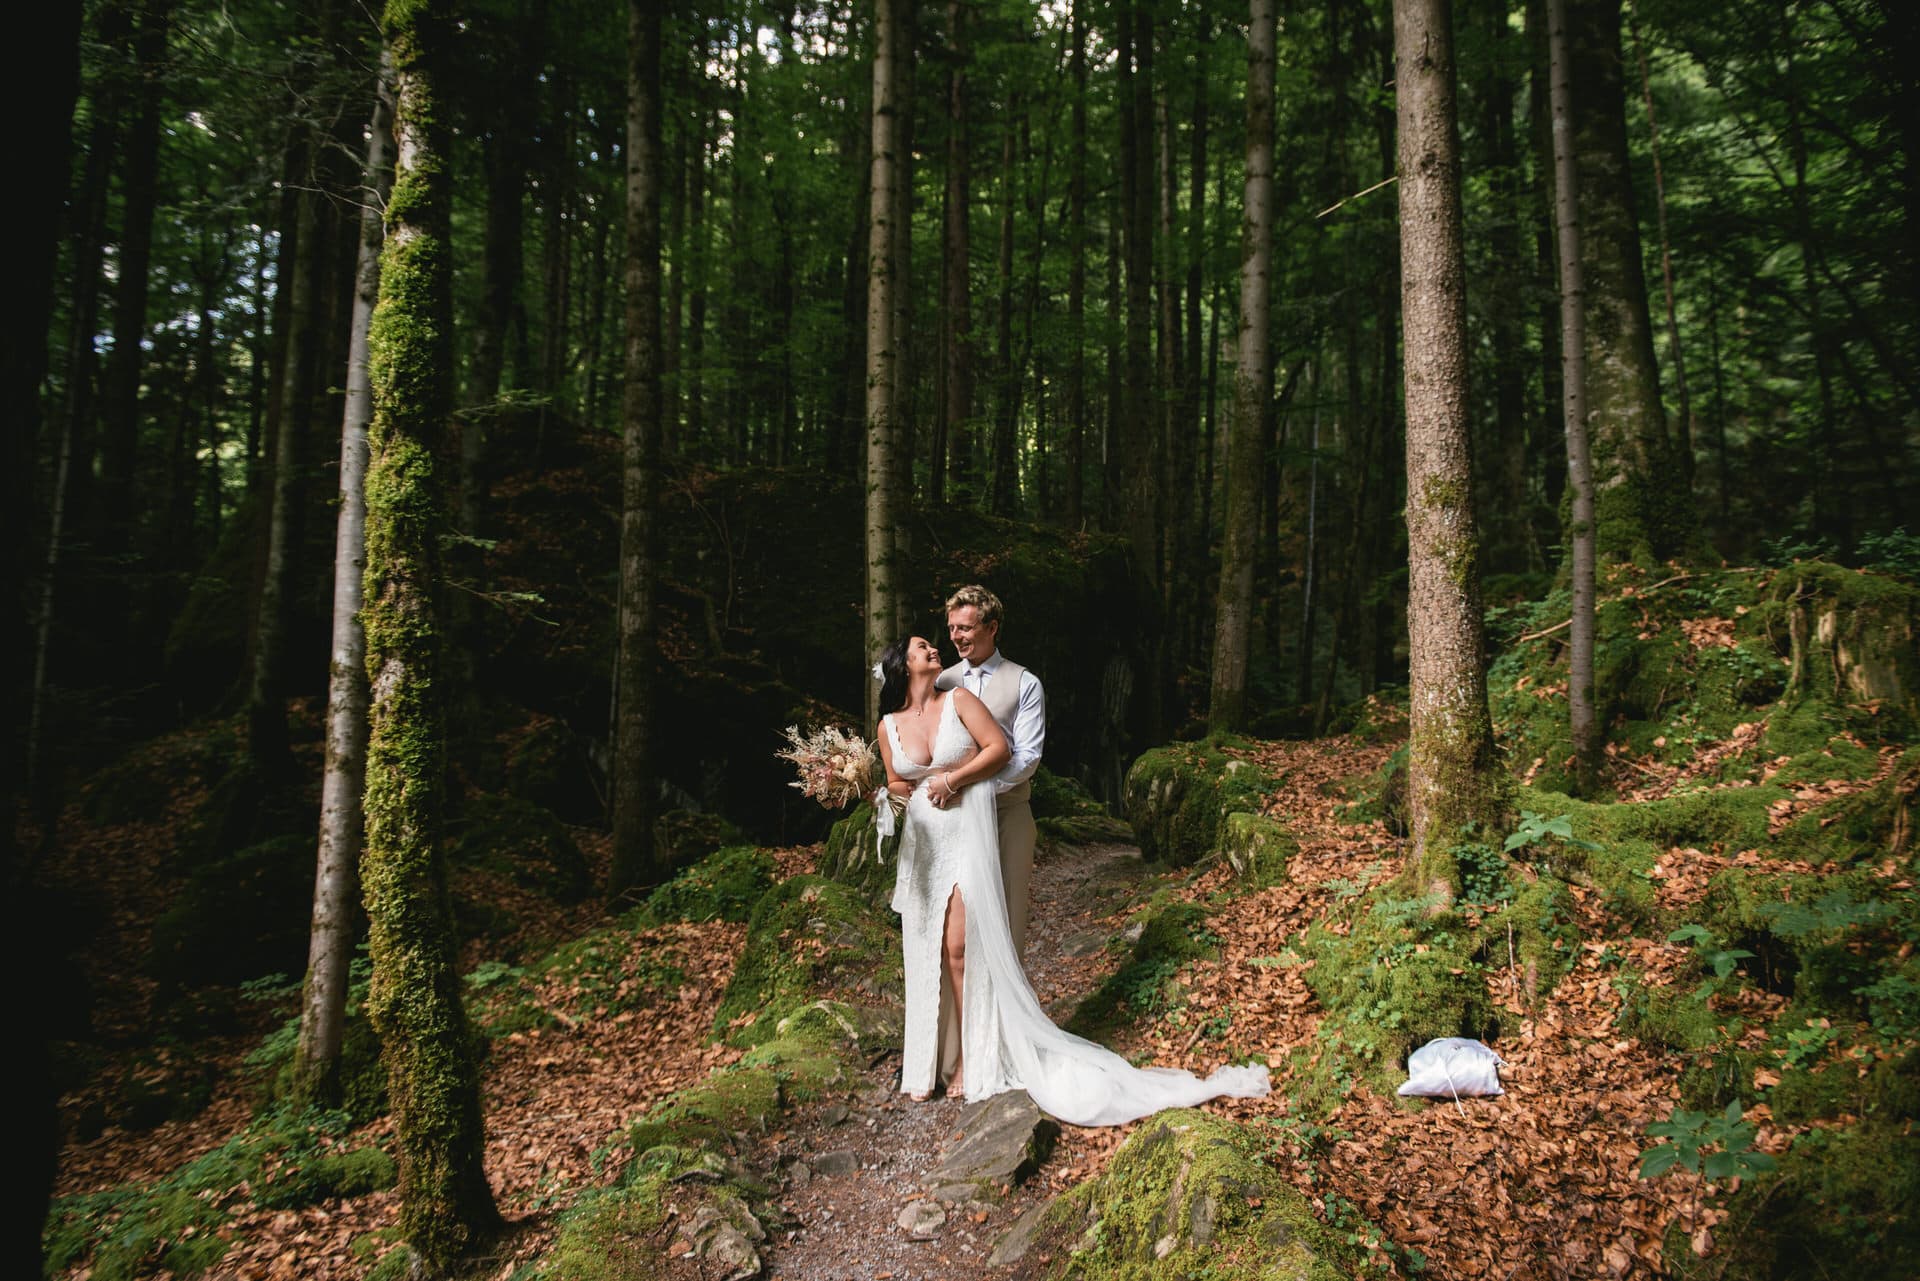 Peaks and passion converged - a mesmerizing hiking elopement.